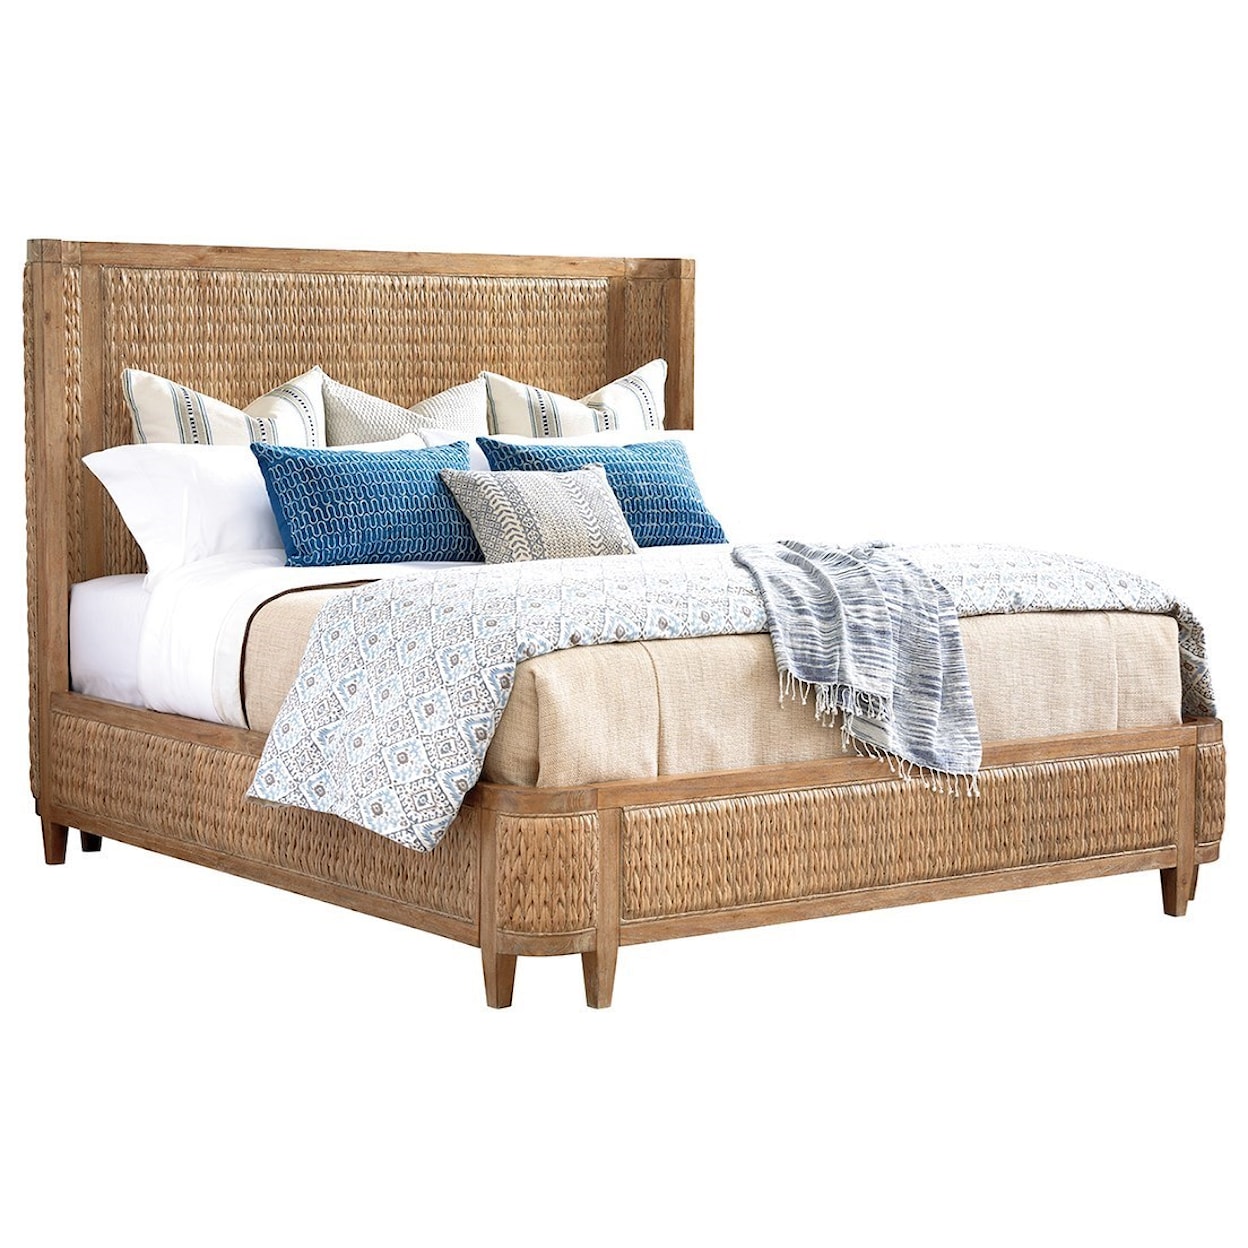 Tommy Bahama Home Los Altos Ivory Coast Woven Bed 5/0 Queen